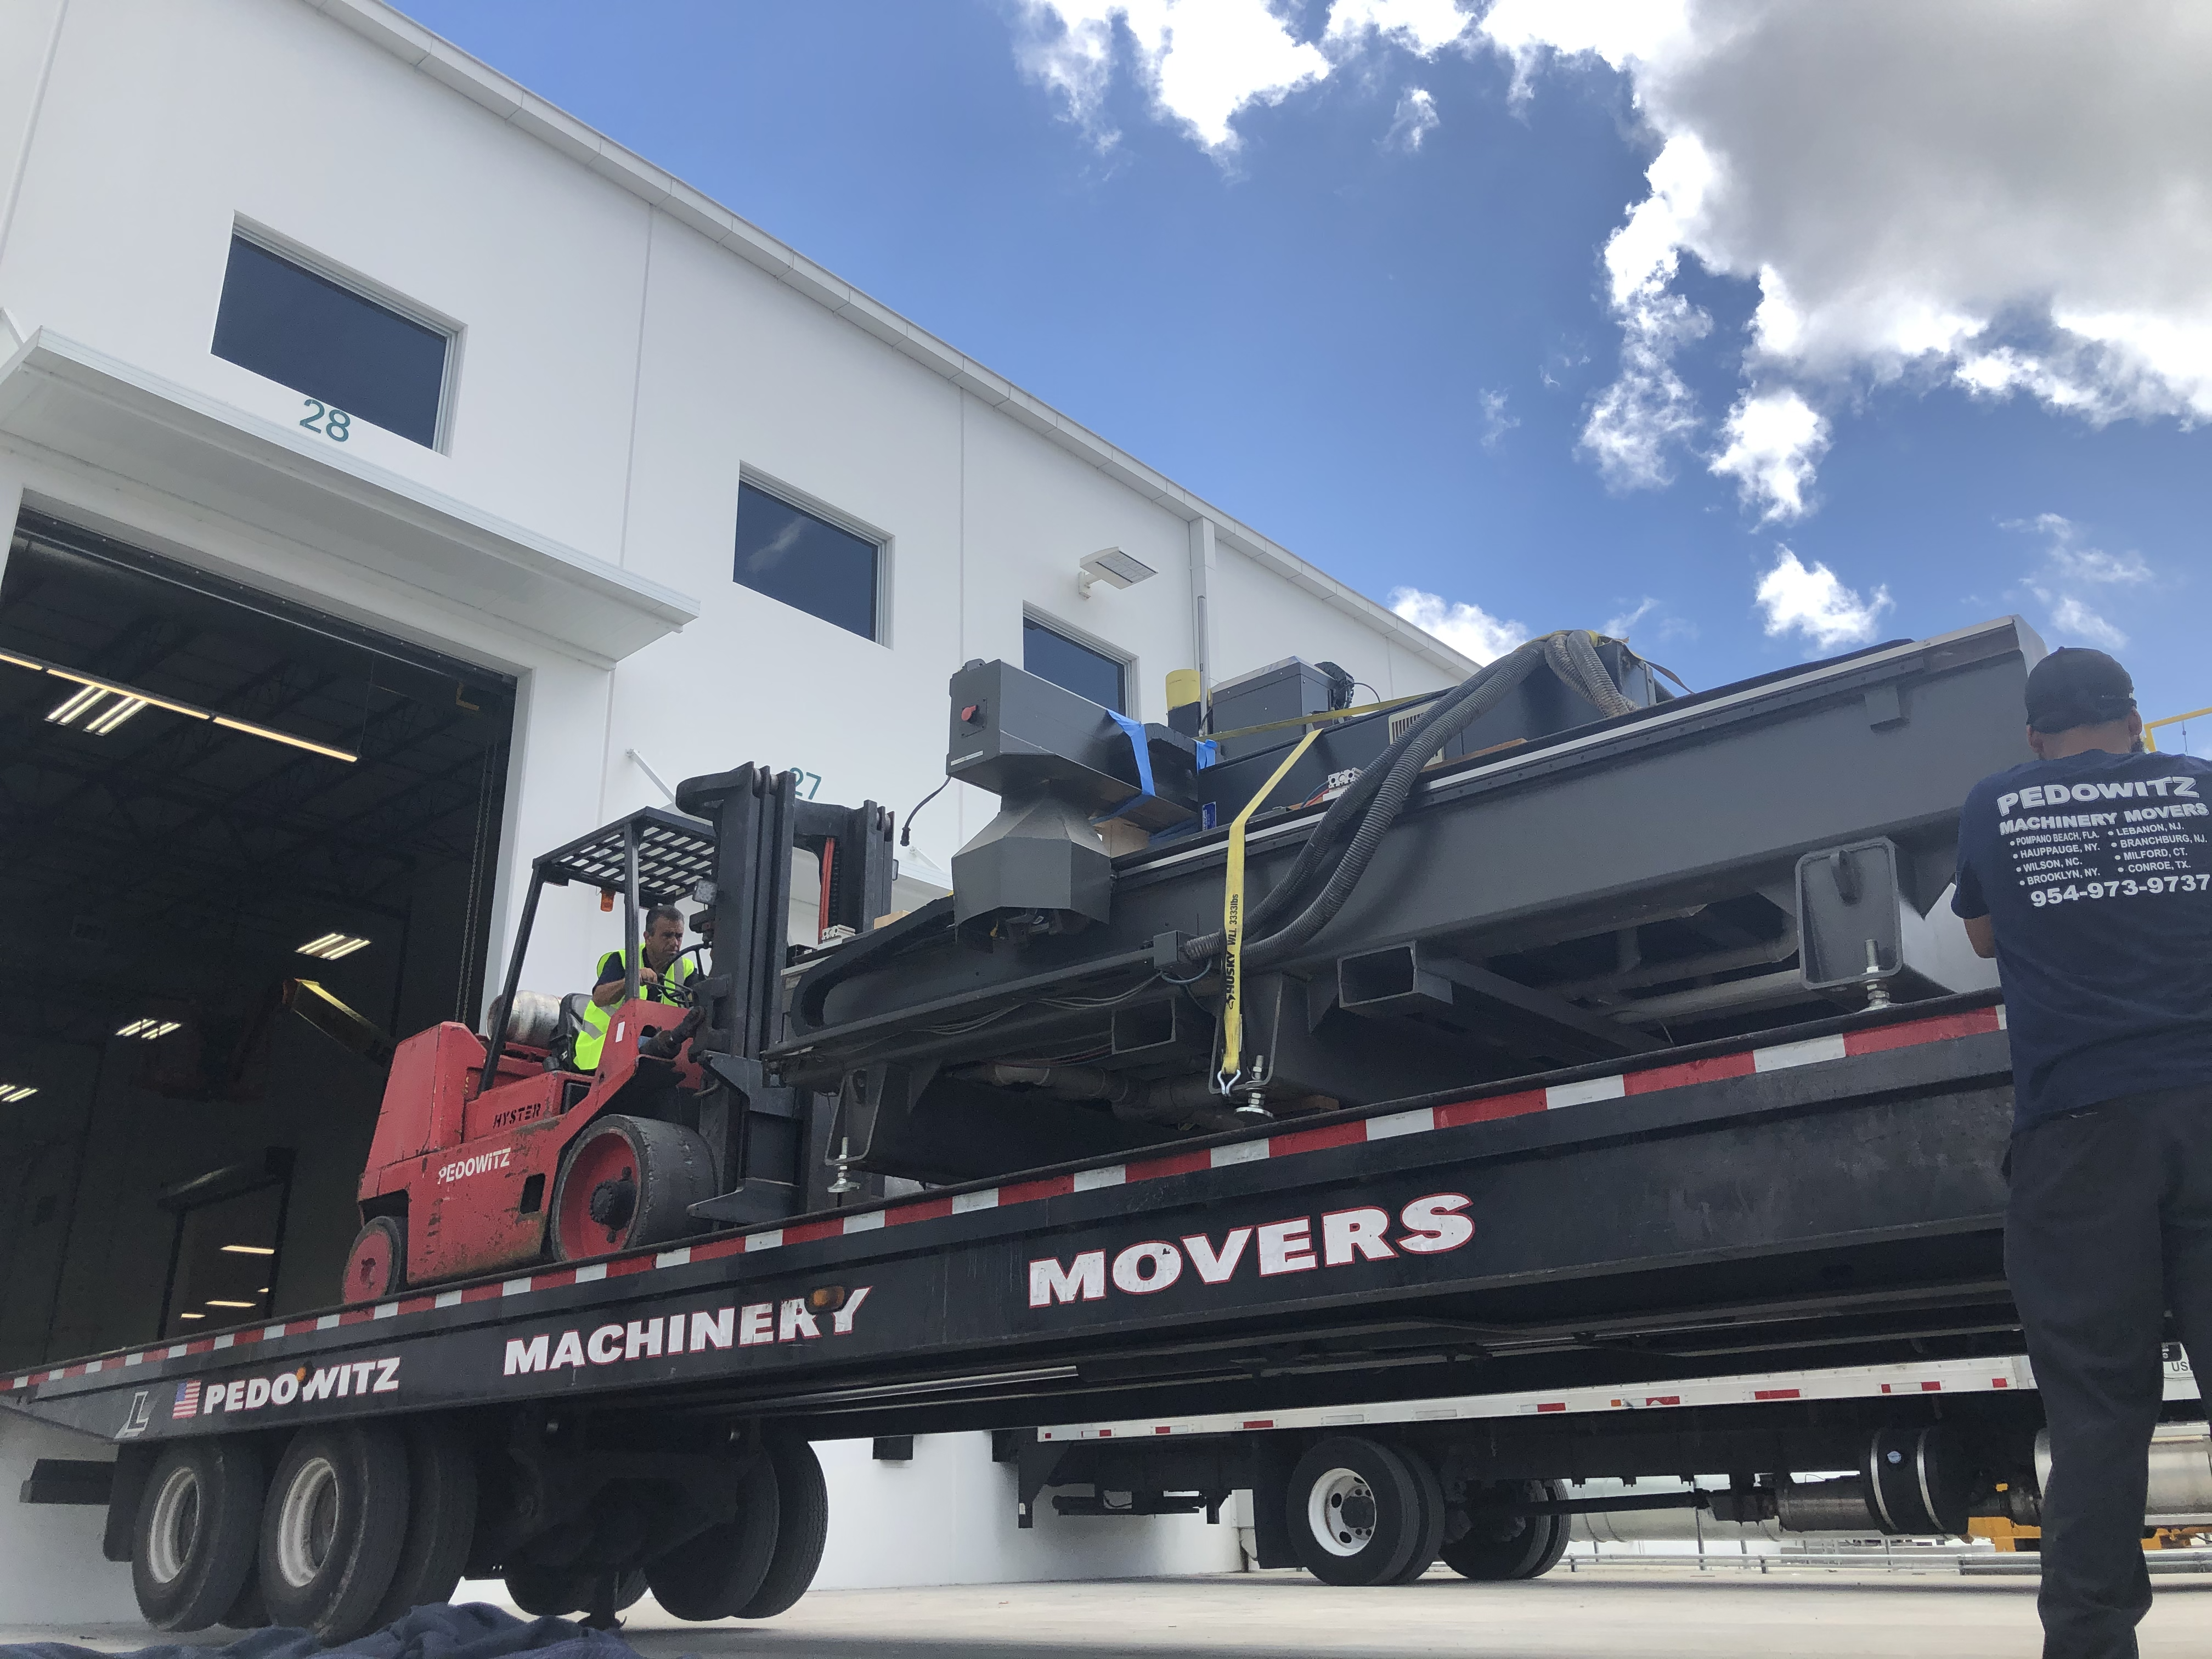 You are currently viewing CNC MACHINE TRANSPORTATION MIAMI